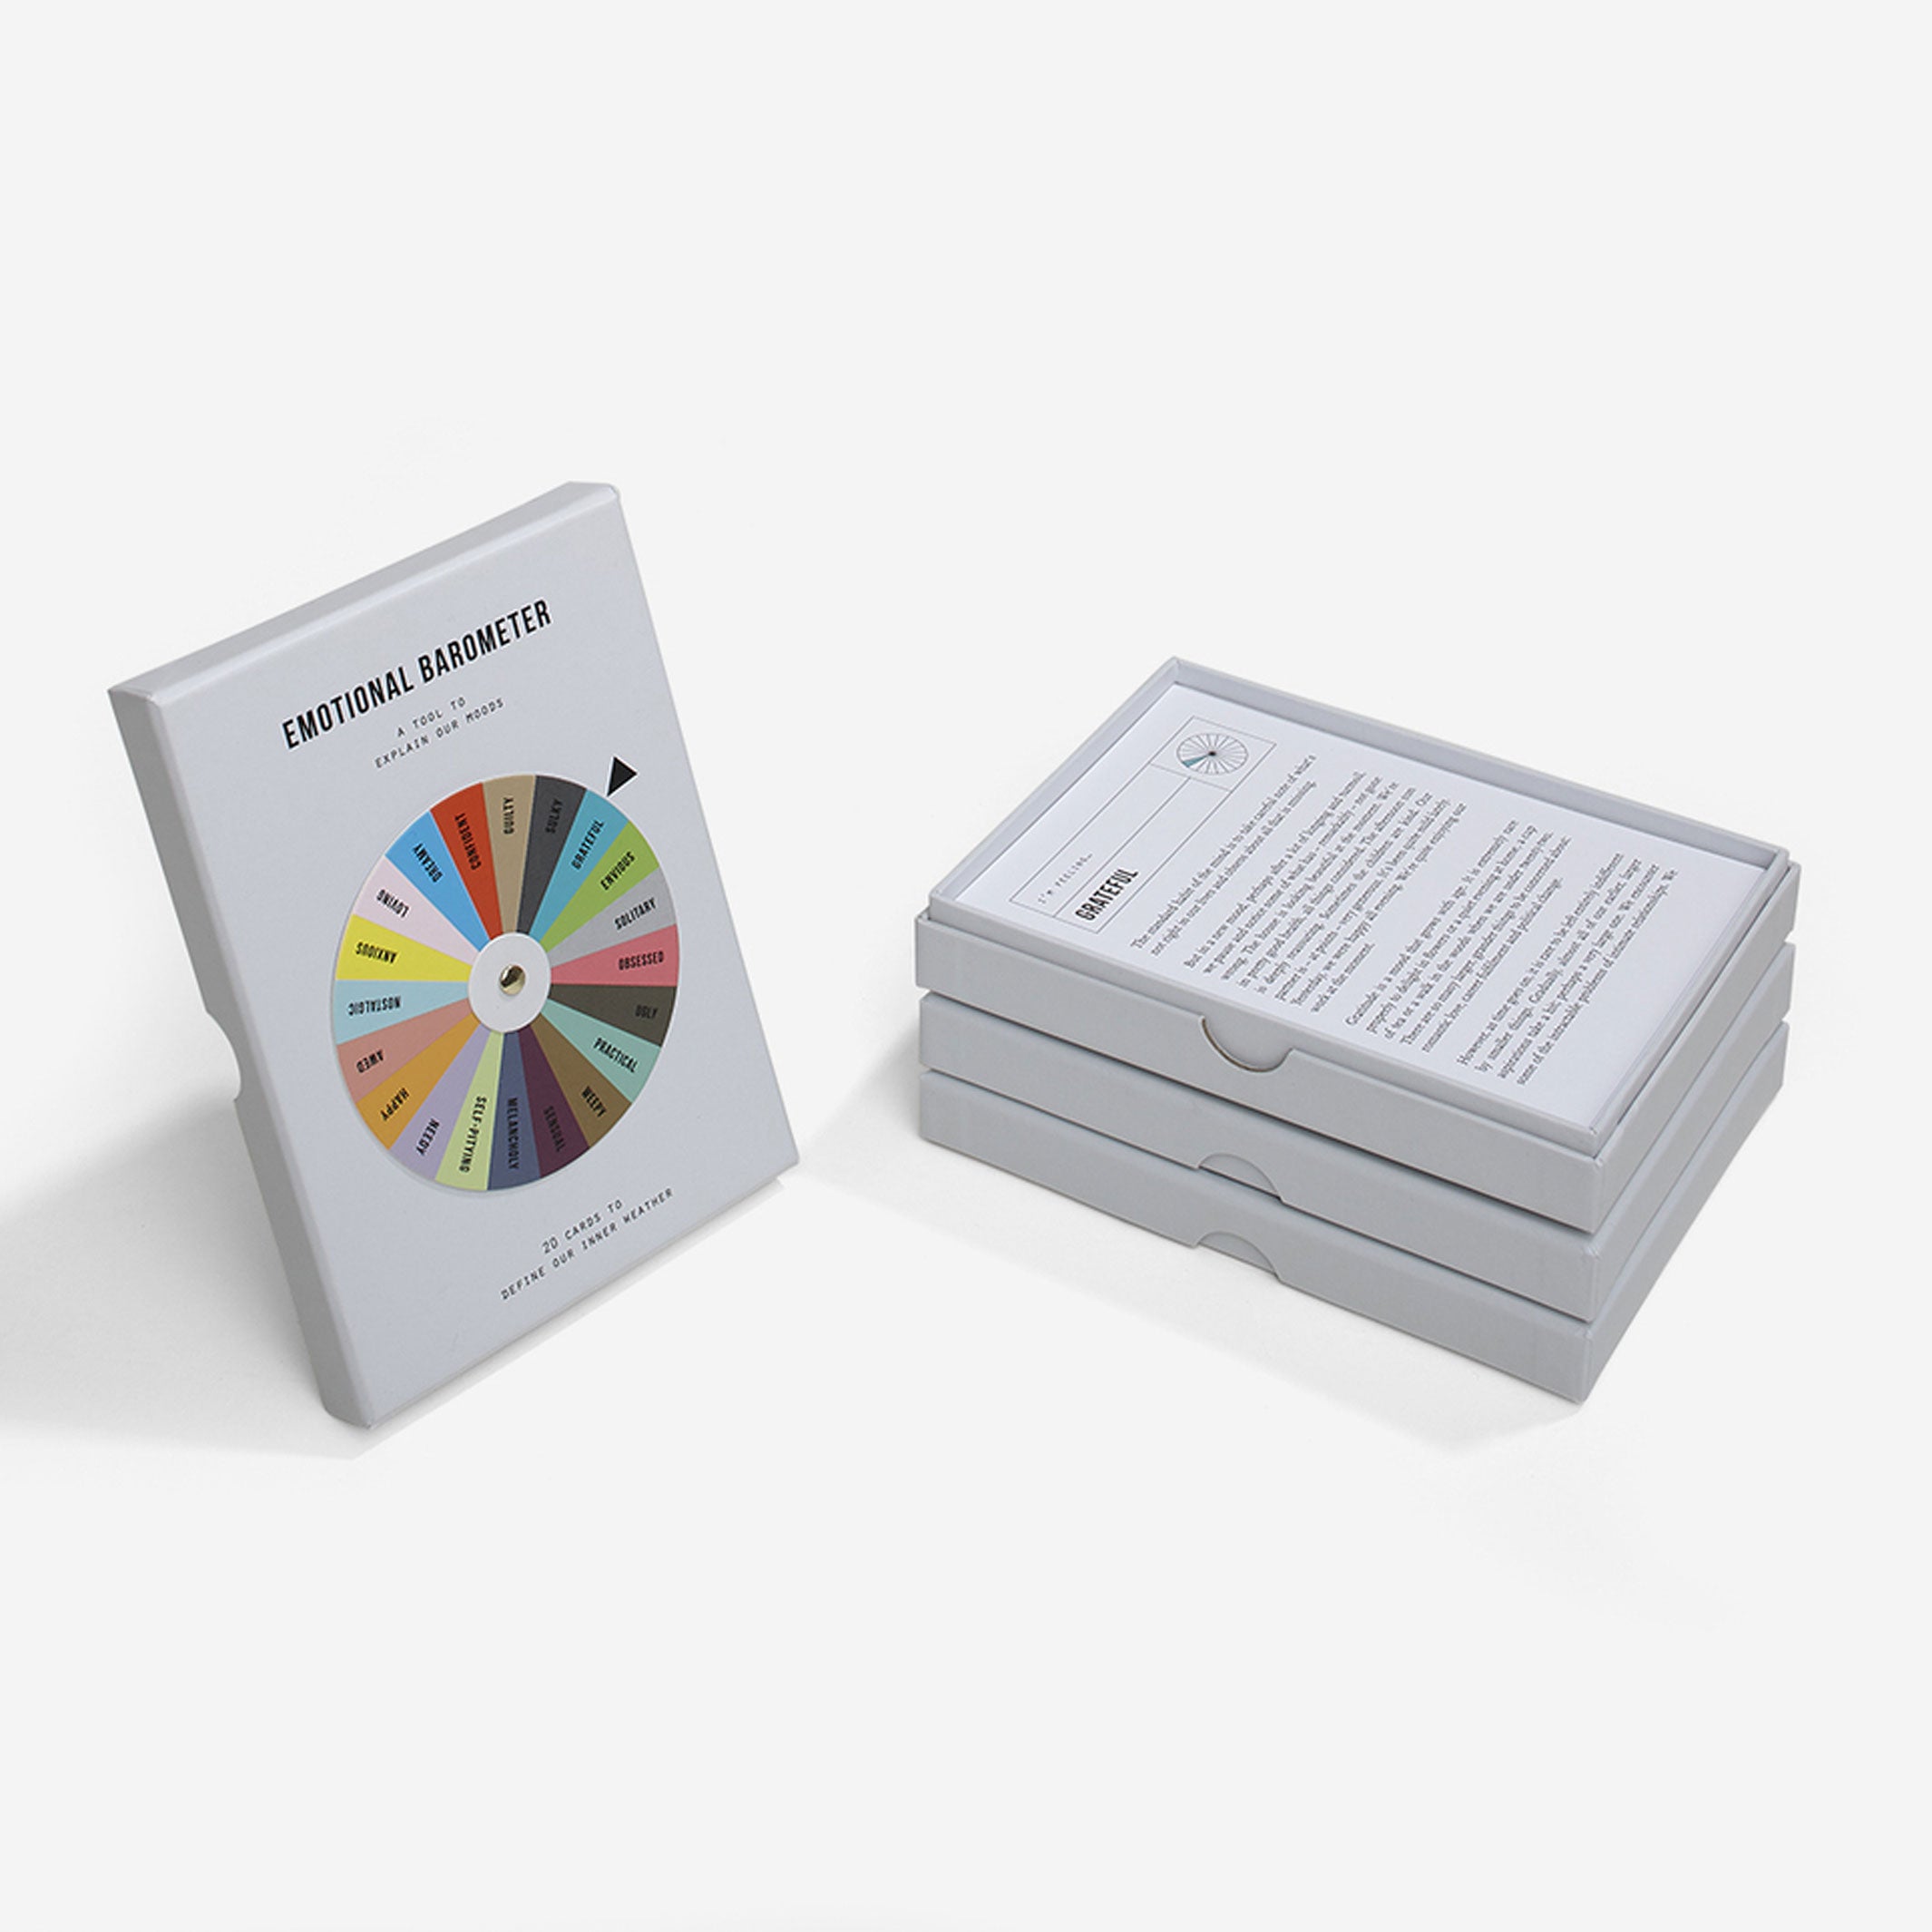 EMOTIONAL BAROMETER | CARD GAME to Explain Our Moods | English Edition | The School of Life